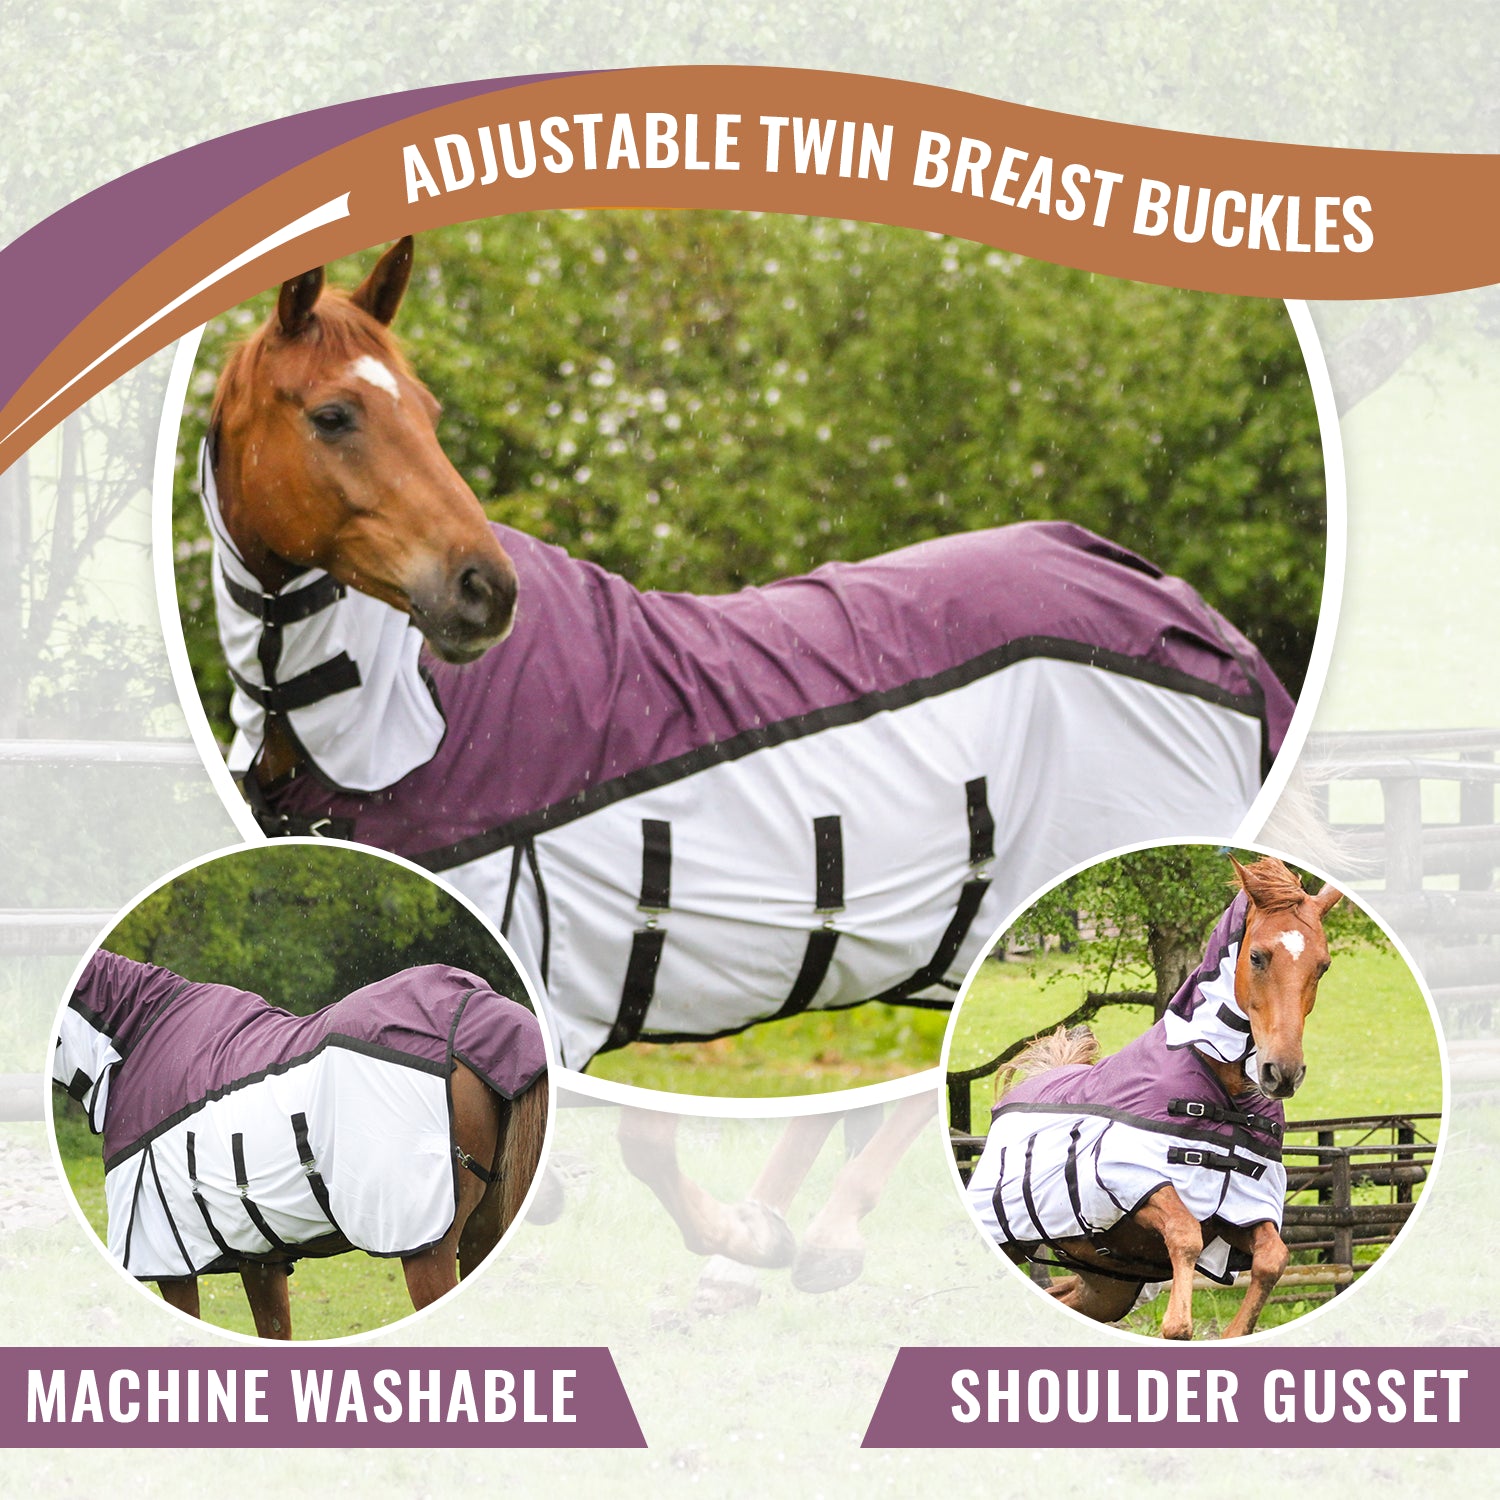 600D 2 in 1 Waterproof Fly Turnout Mesh Horse Rug Fixed Neck Burgundy/White 5'6-6'9 - Tack24